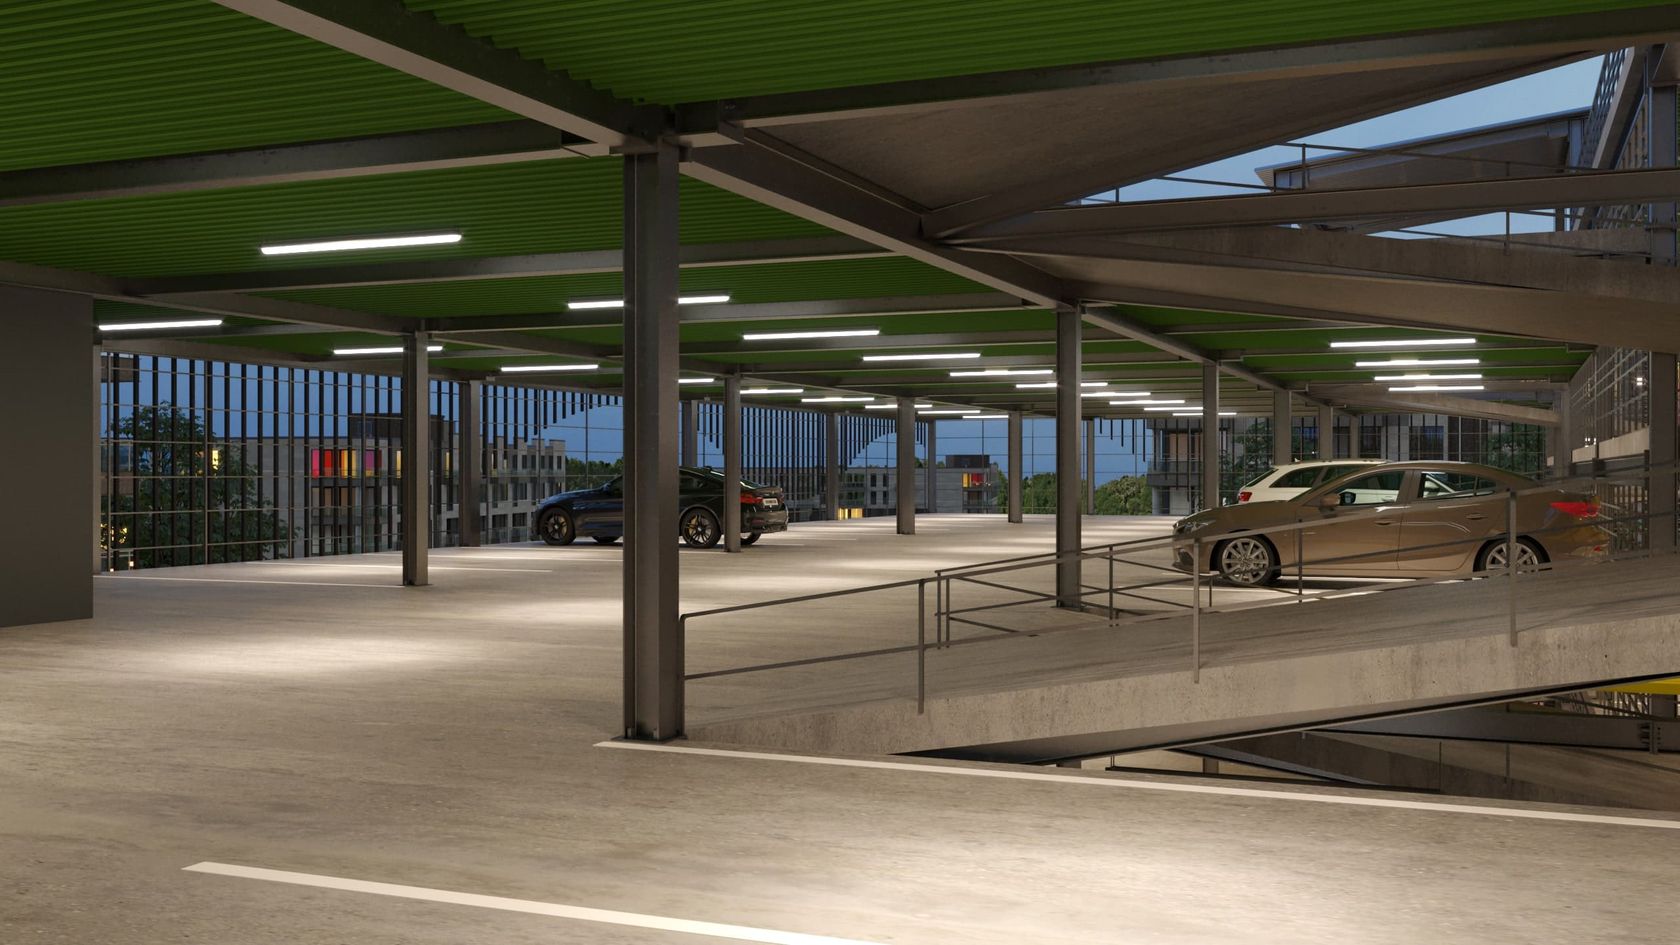 Steel car parks: how to deal with urban car congestion